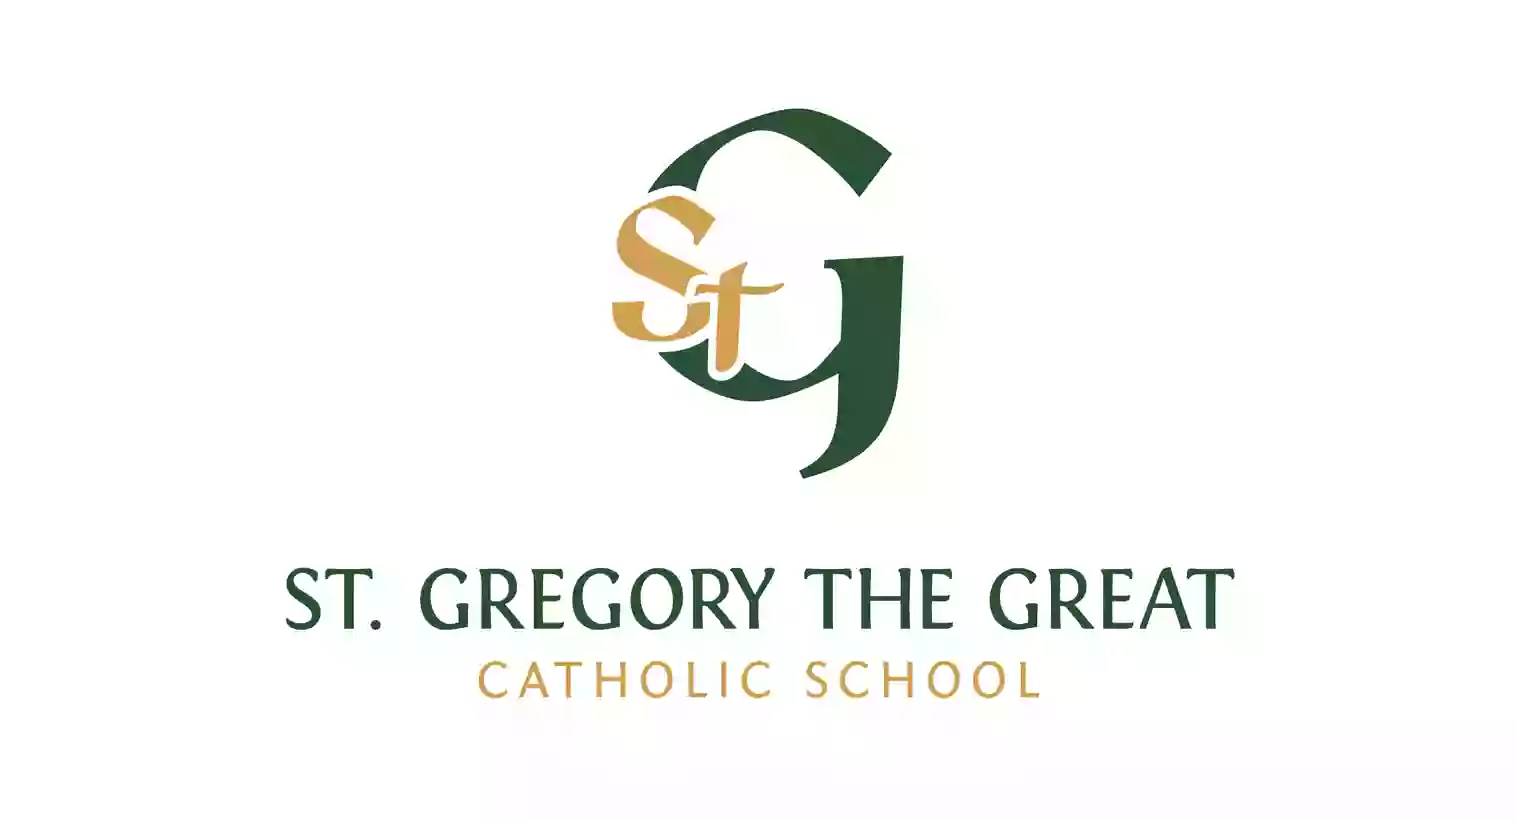 St. Gregory the Great Catholic School